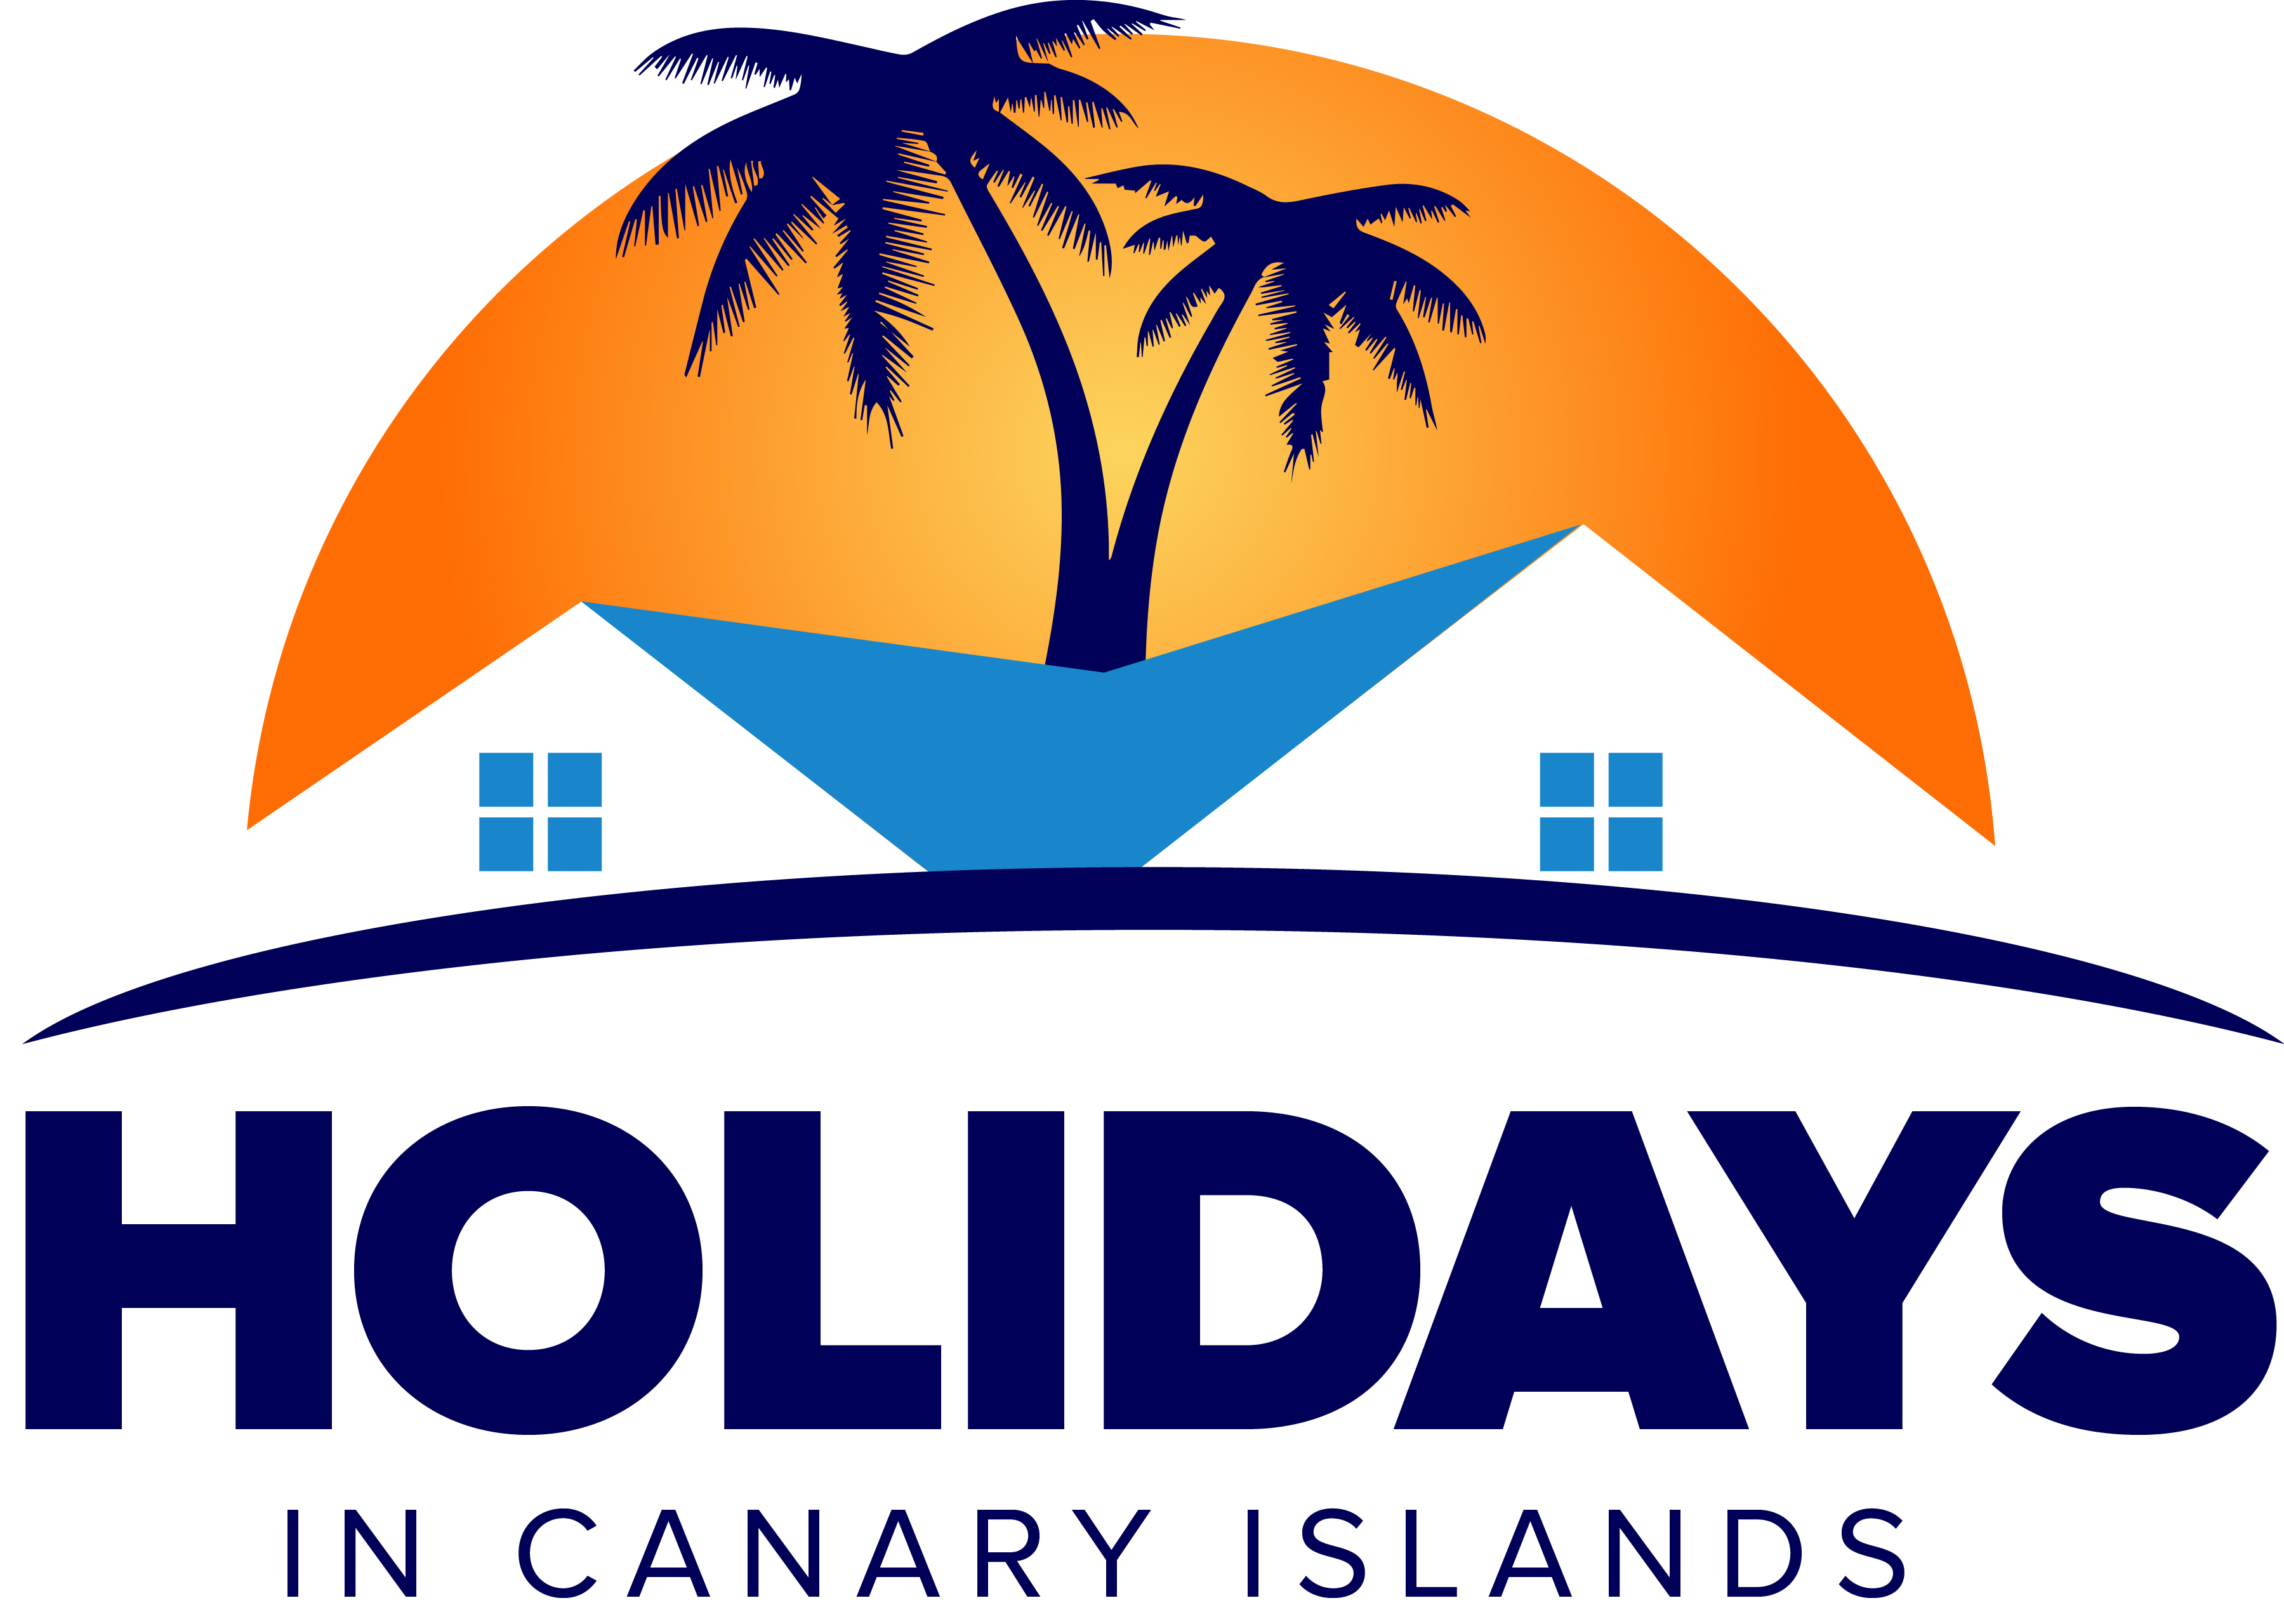 HOLIDAYS IN CANARY ISLANDS